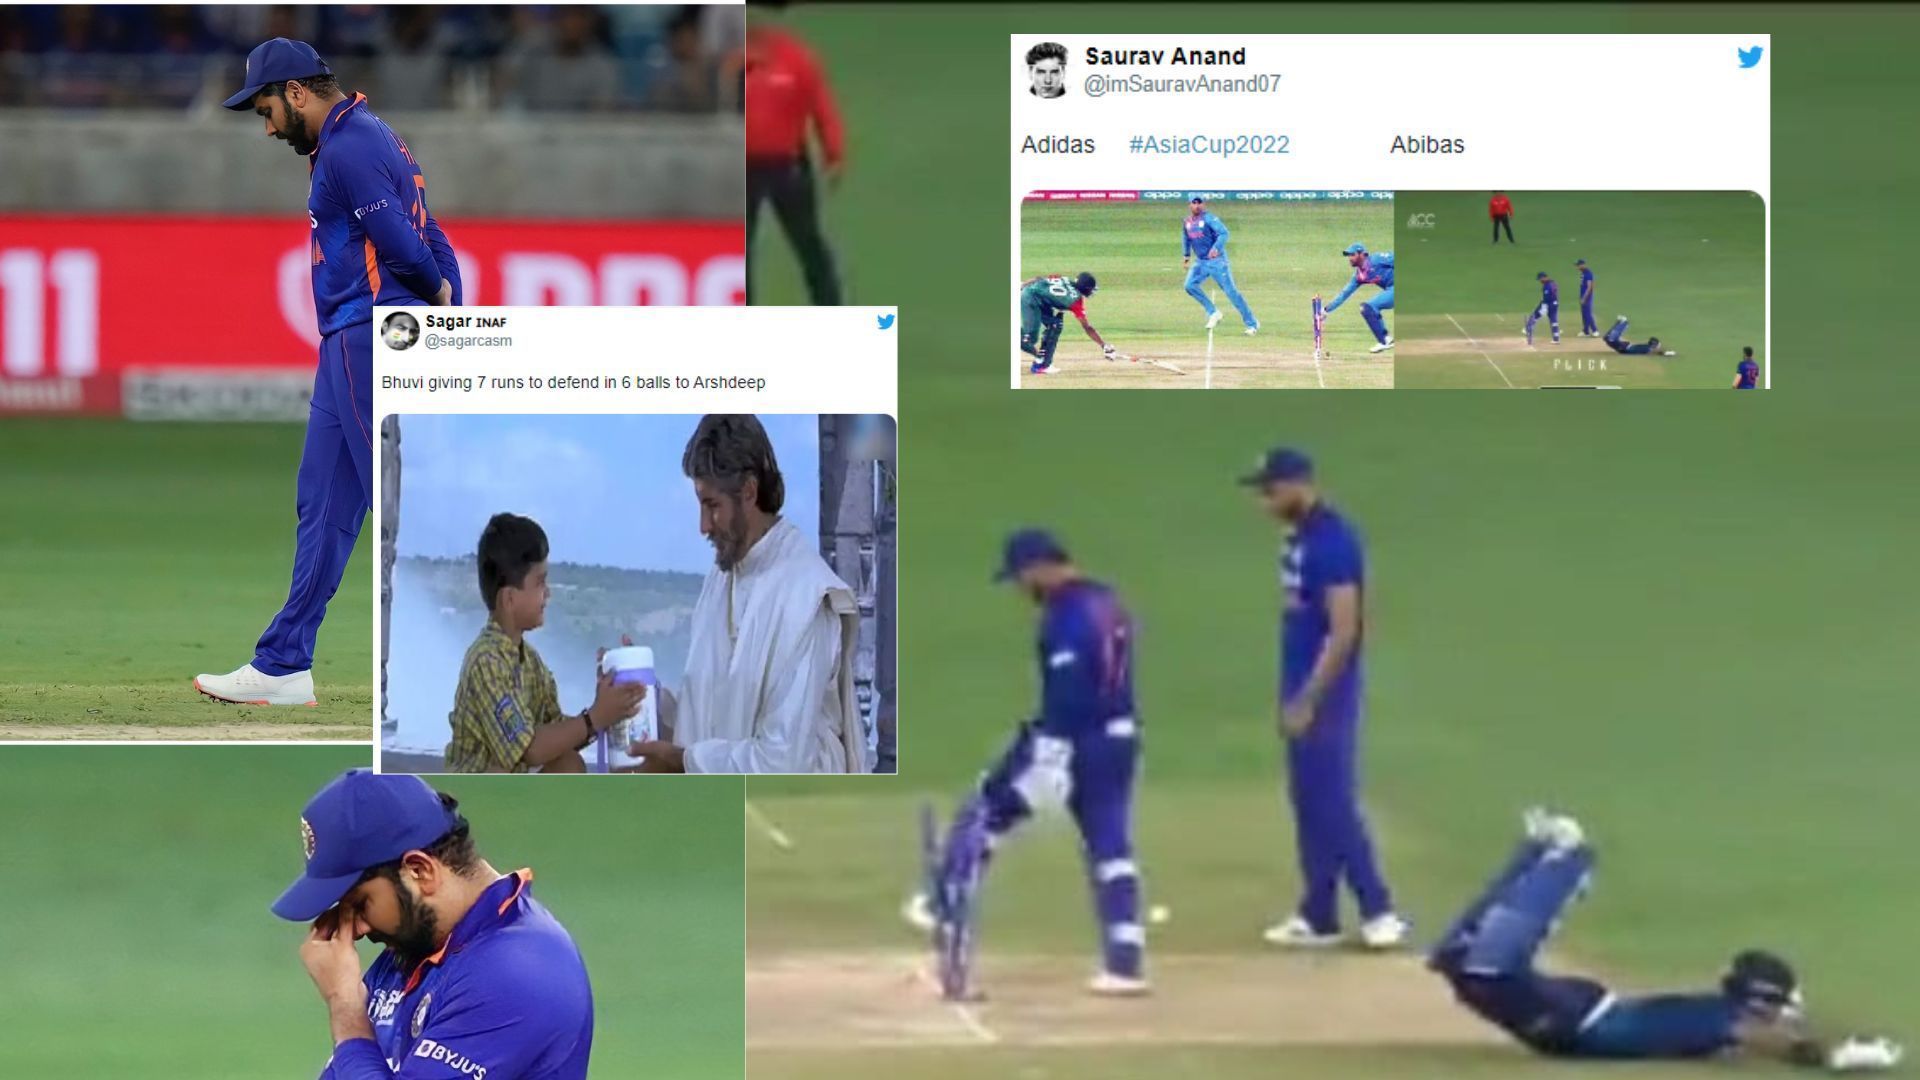 Fans trolled Rishabh Pant, Bhuvneshwar Kumar as well as the team management for the embarrassing loss